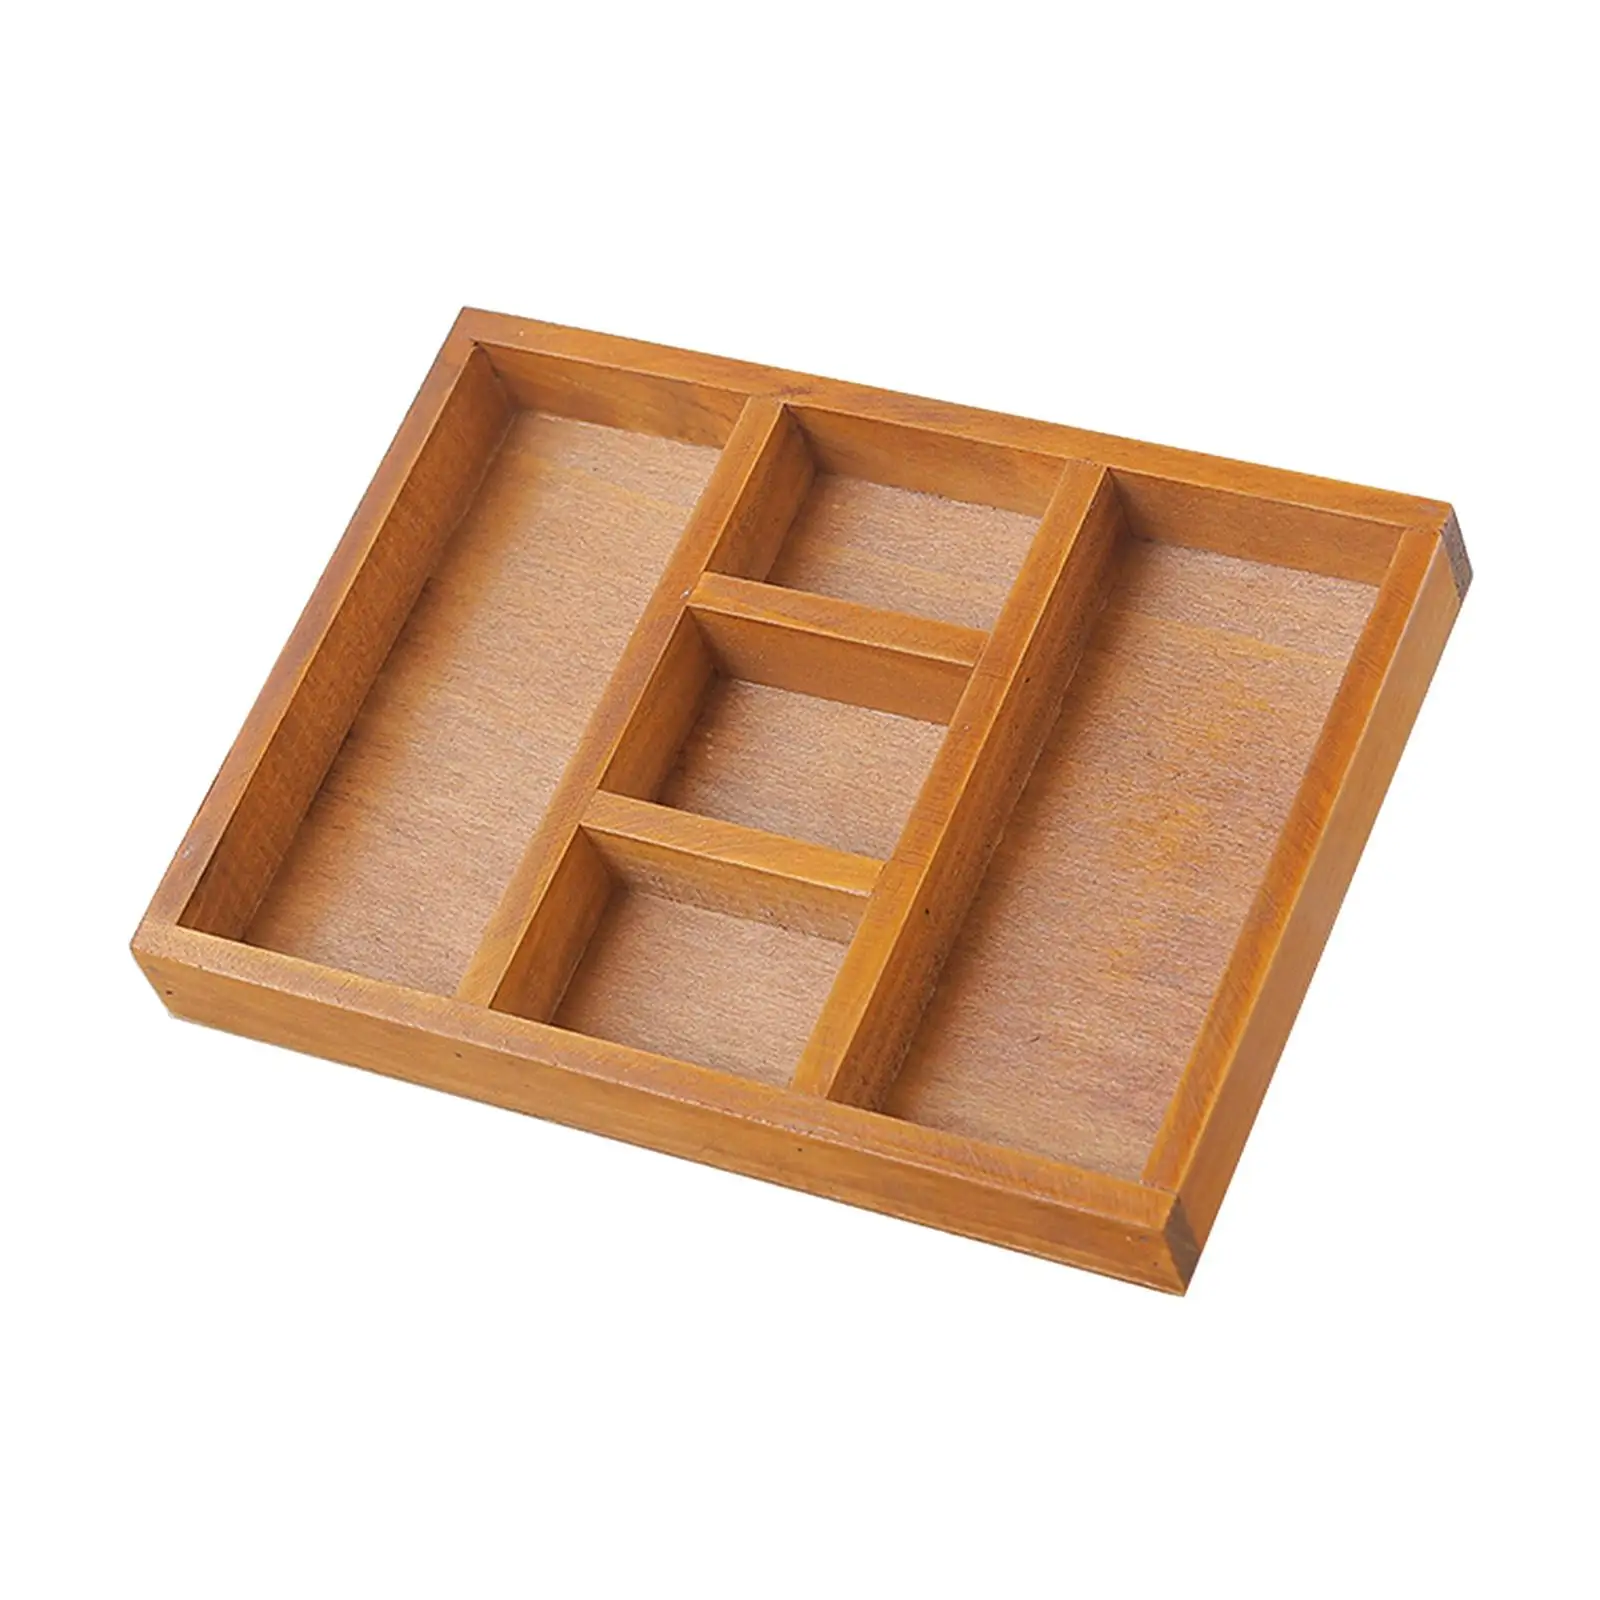 Wooden Jewelry Display Tray Case Holder Divider Box for Accessories Sundries Necklace Cosmetic Home Organization